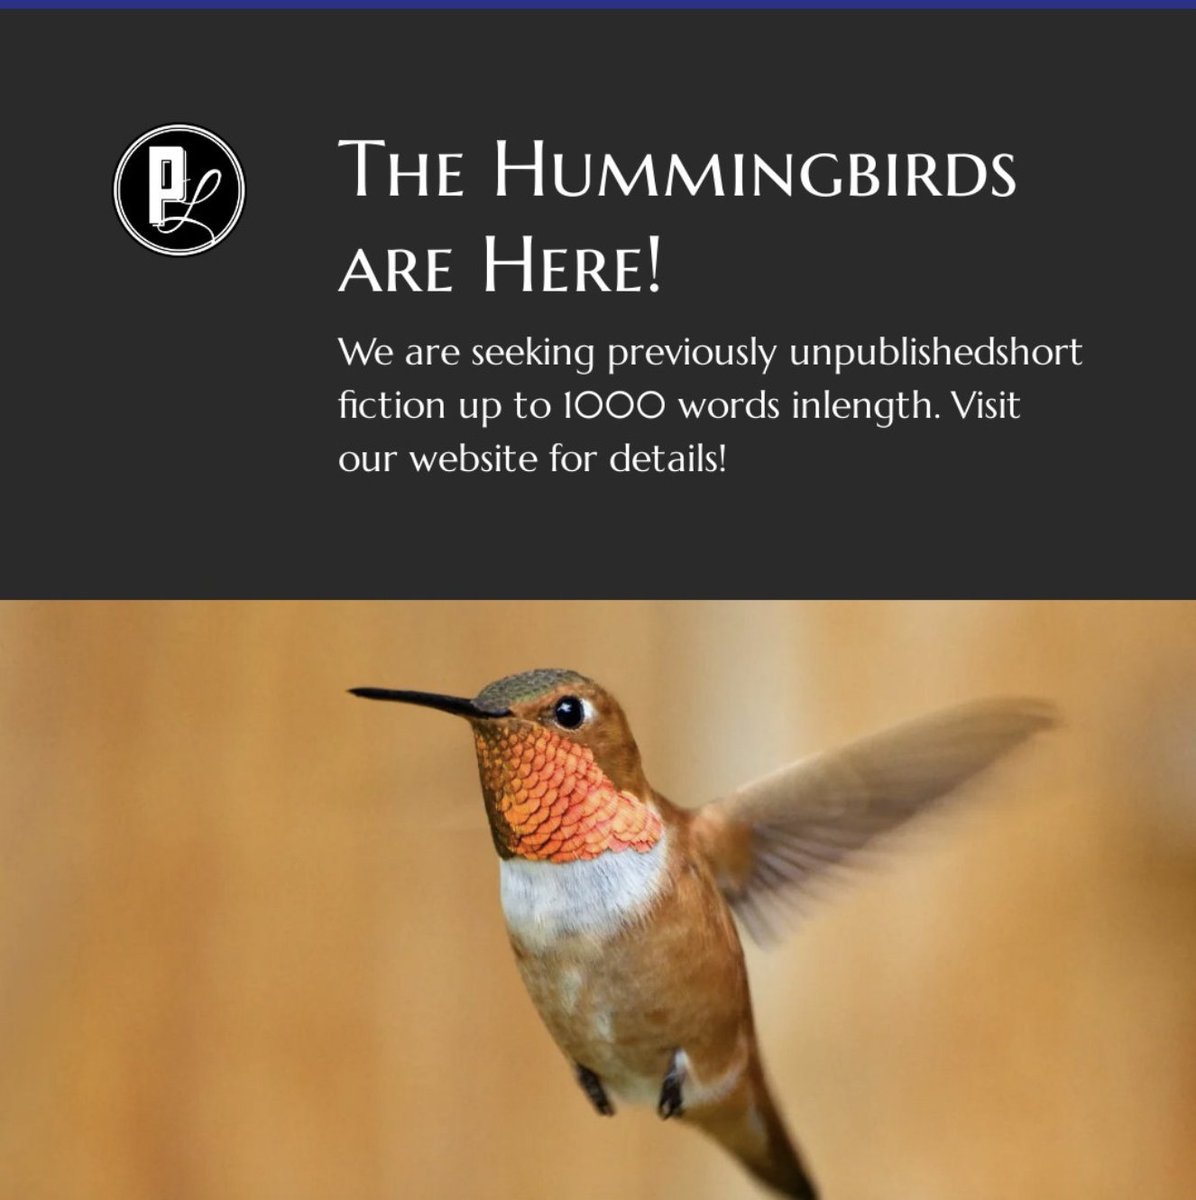 Fans of flash fiction rejoice! Pulp Literature's Hummingbird Flash Fiction Prize is now accepting submissions.

We are seeking previously unpublished short fiction up to 1000 words in length. Enter before May 15 to save $5 on your entry fee!

#flashfiction #writingcontest